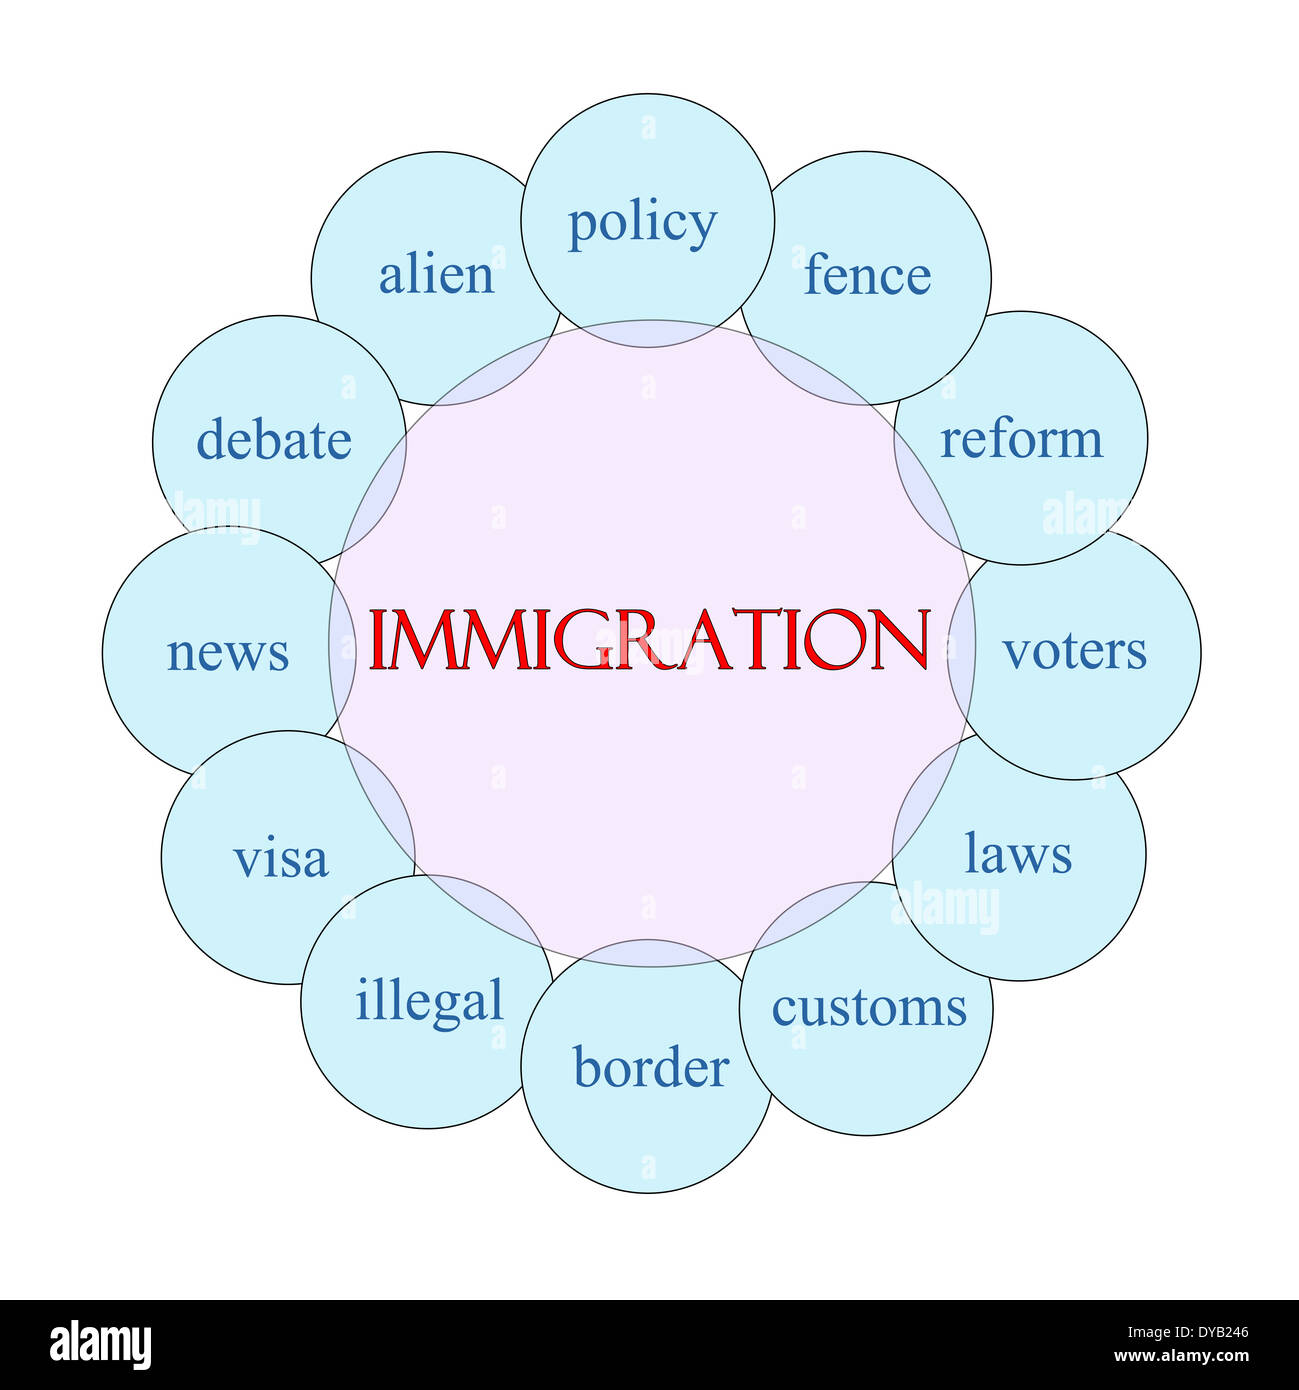 Immigration concept circular diagram in pink and blue with great terms such as fence, reform, voters and more. Stock Photo